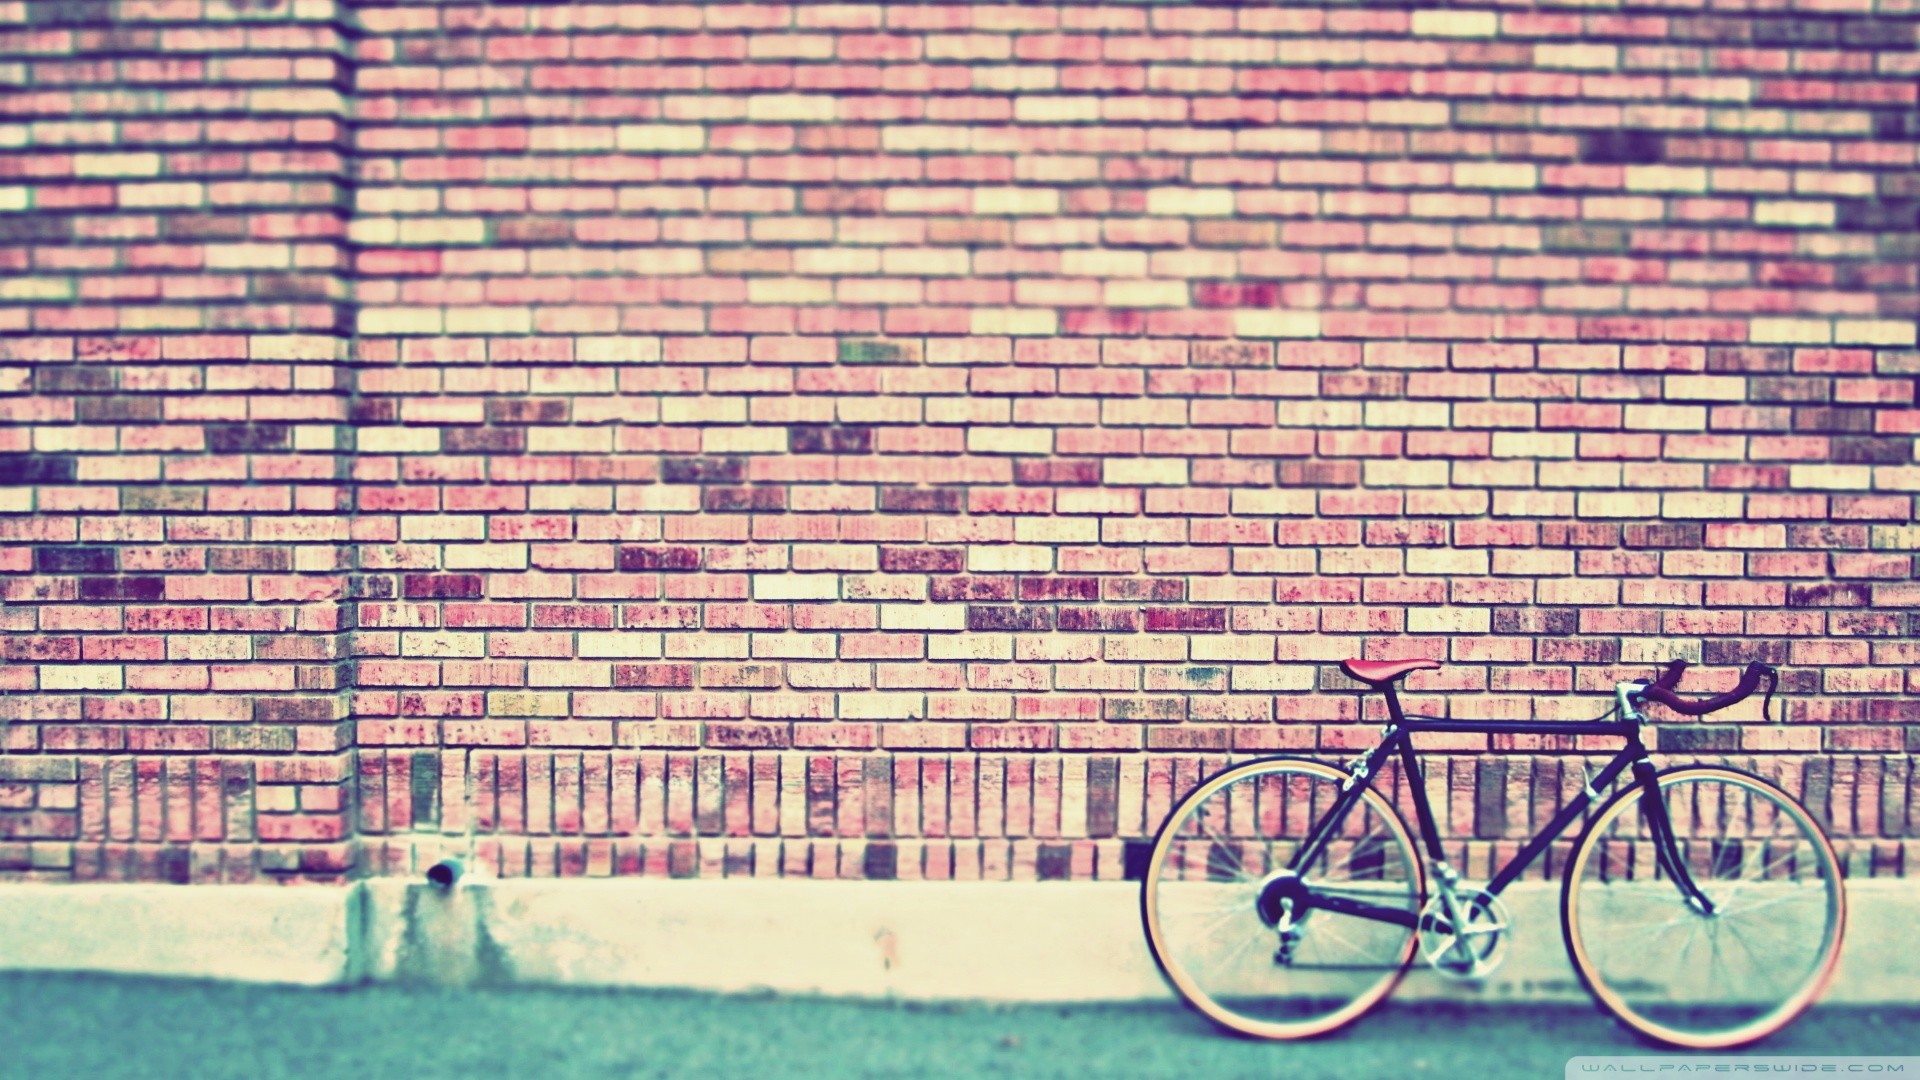 1920x1080 Bicycle by a brick wall wallpaper